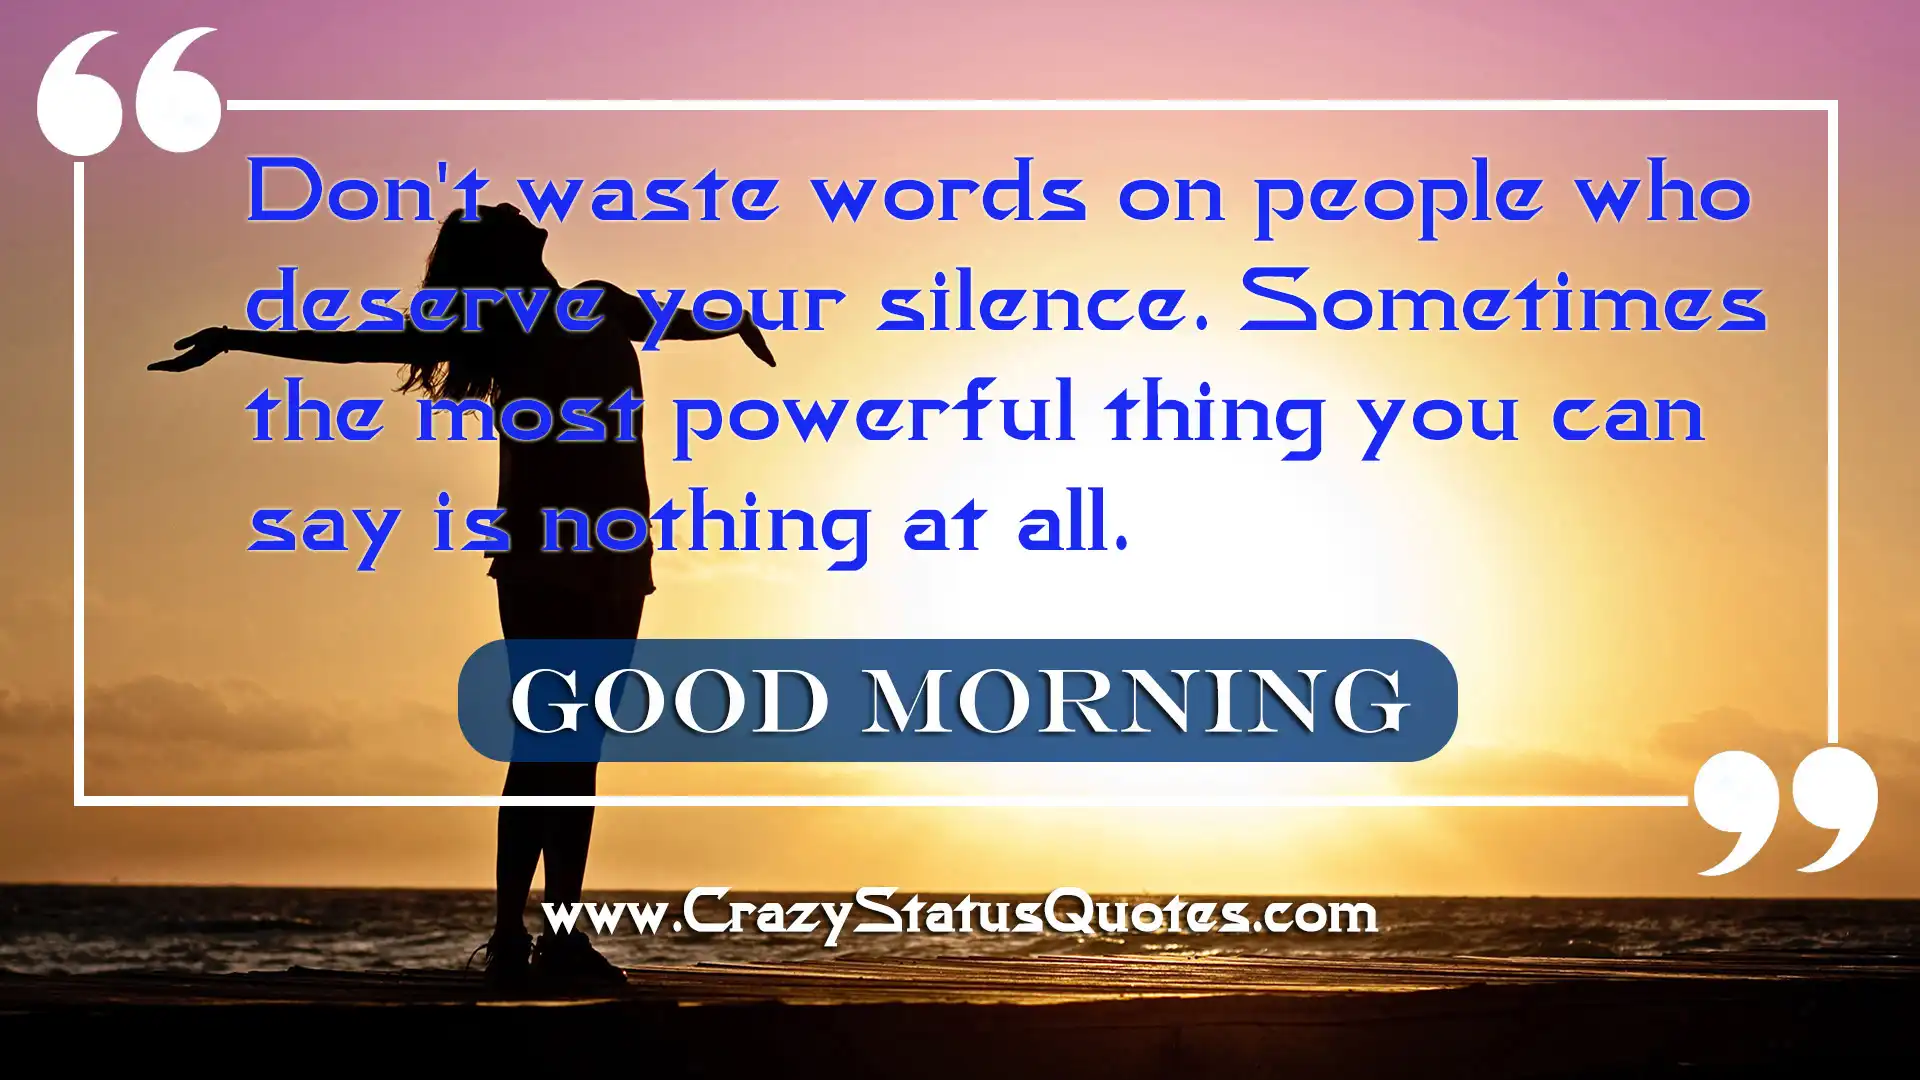 Don't waste words on people who deserve your silence. Sometimes the most powerful thing you can say is nothing at all